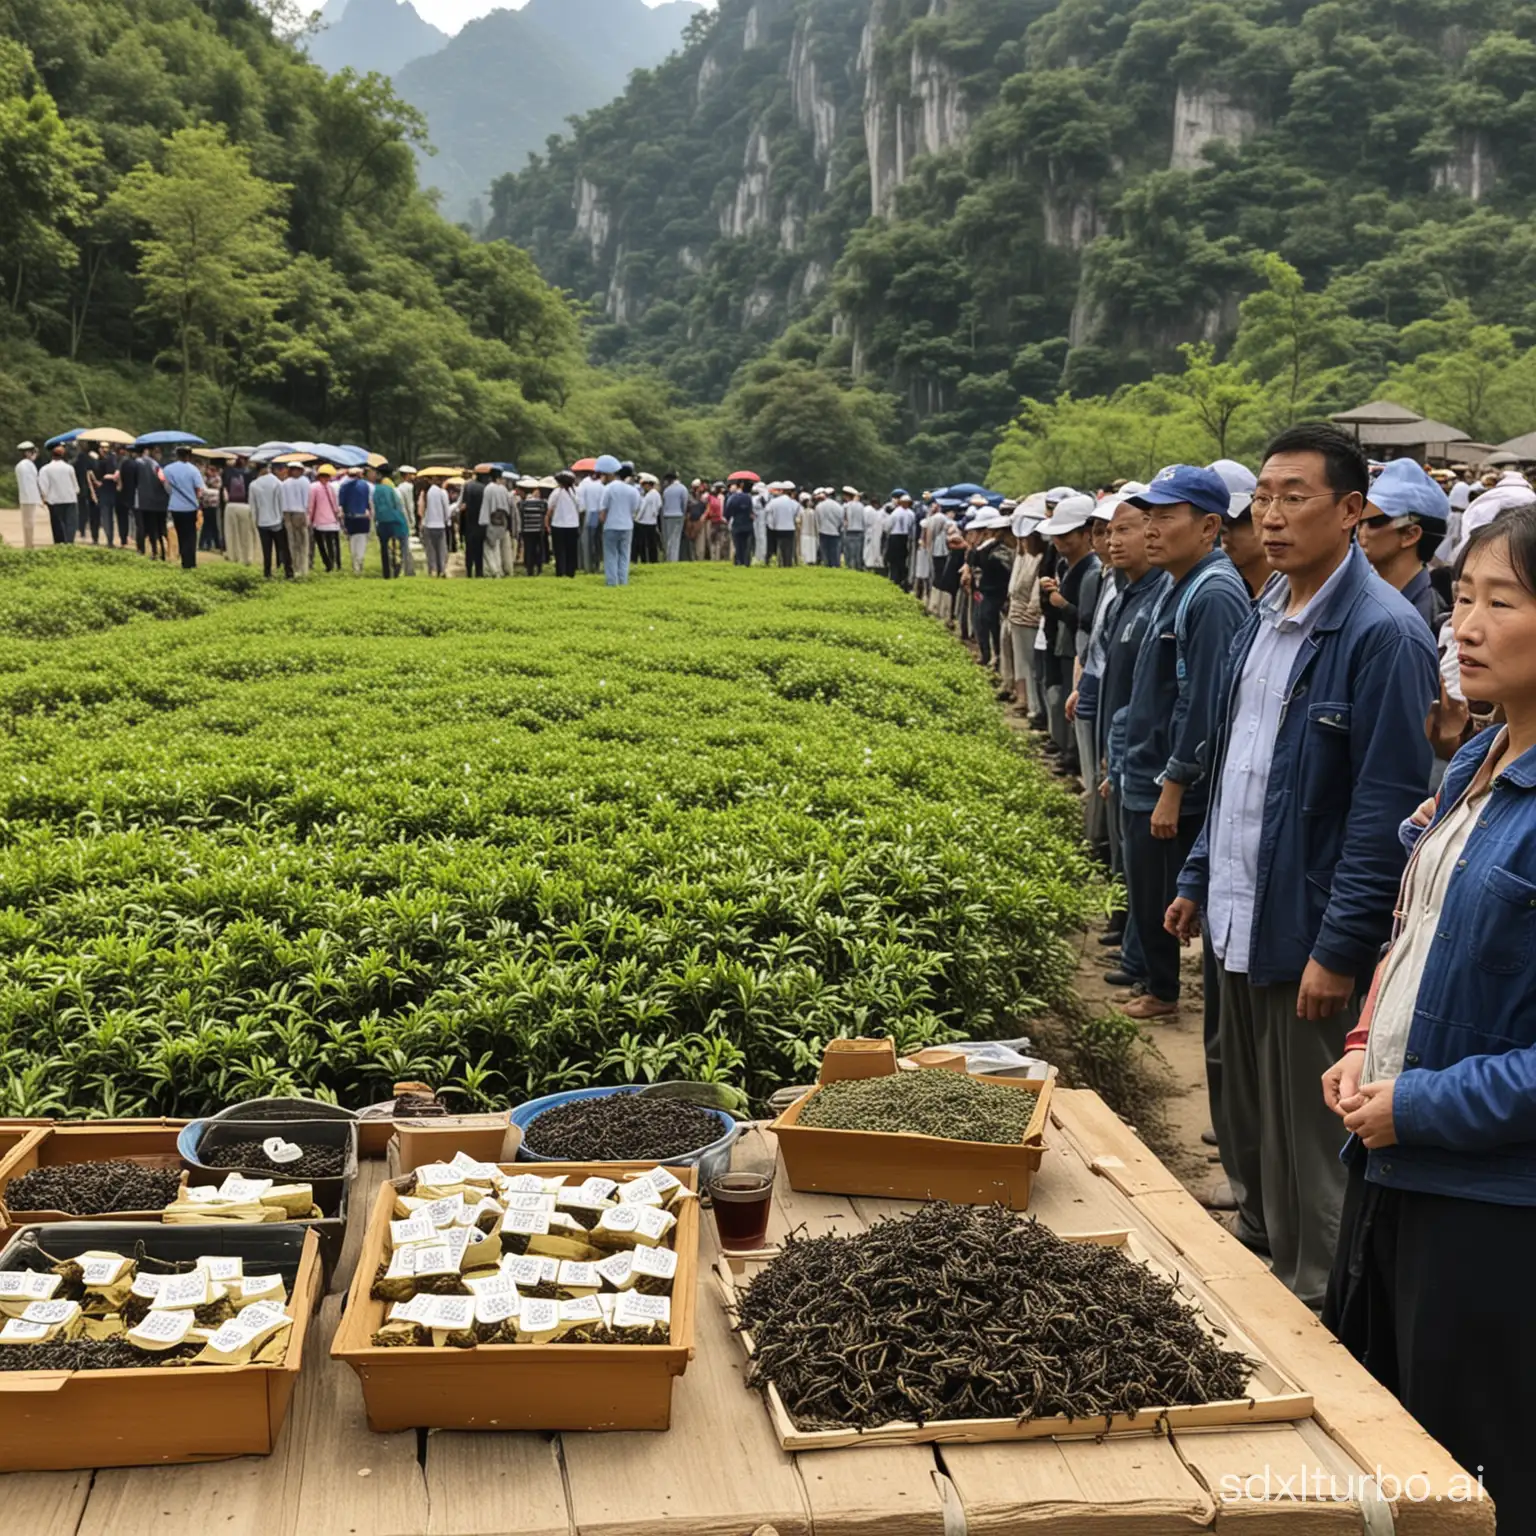 Wuyi-Mountain-Tea-Ceremony-with-Crowd-in-Background